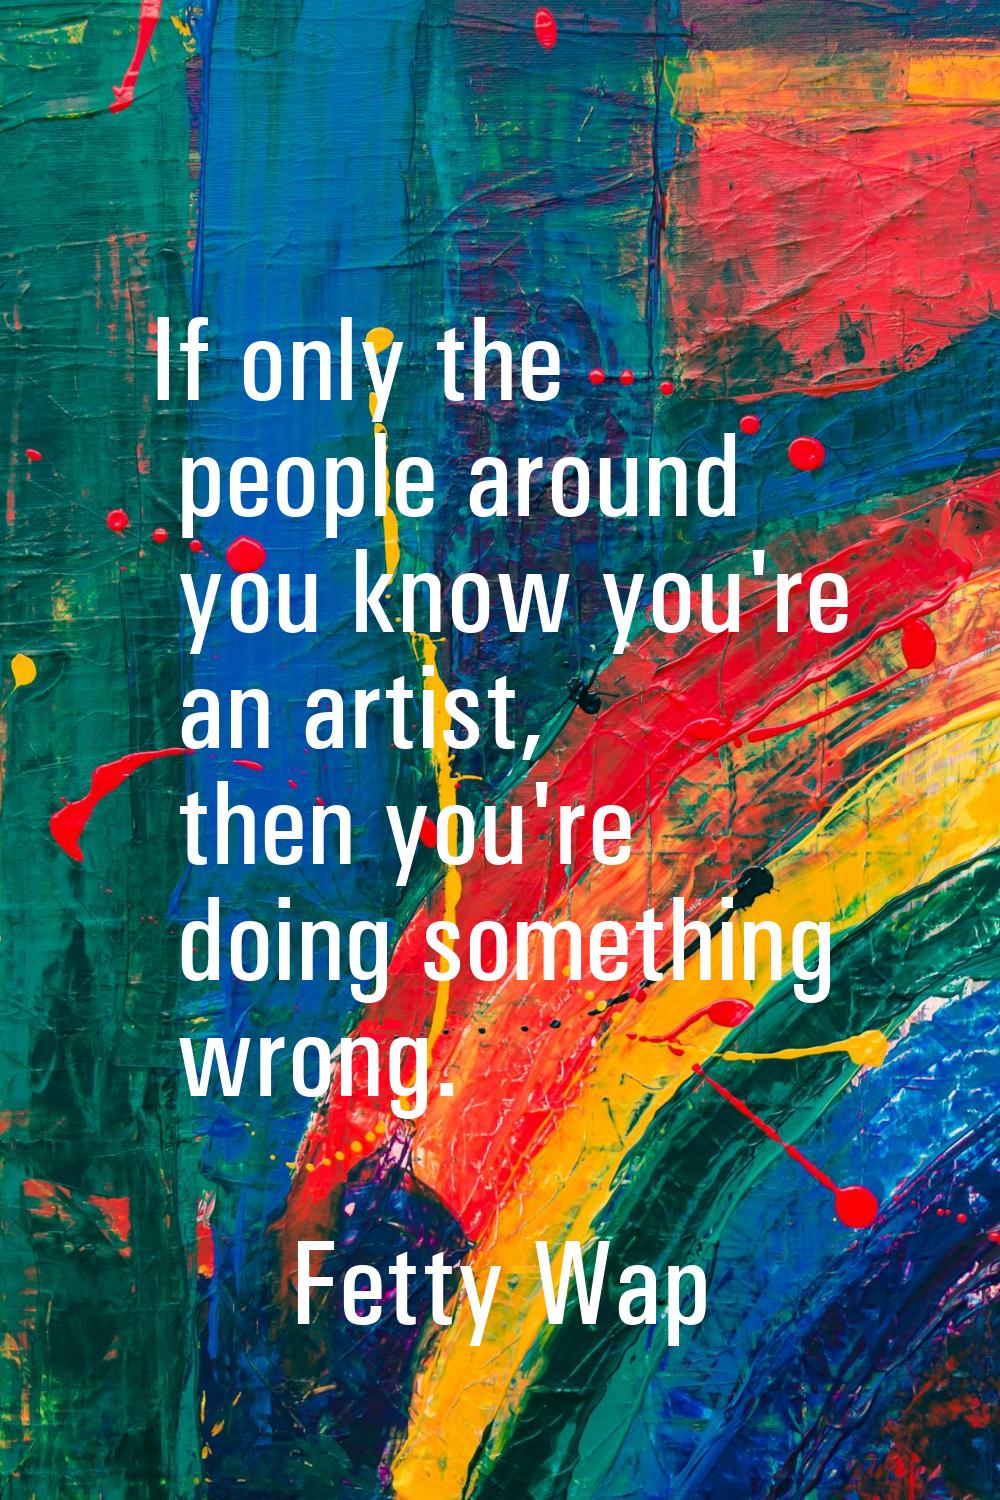 If only the people around you know you're an artist, then you're doing something wrong.